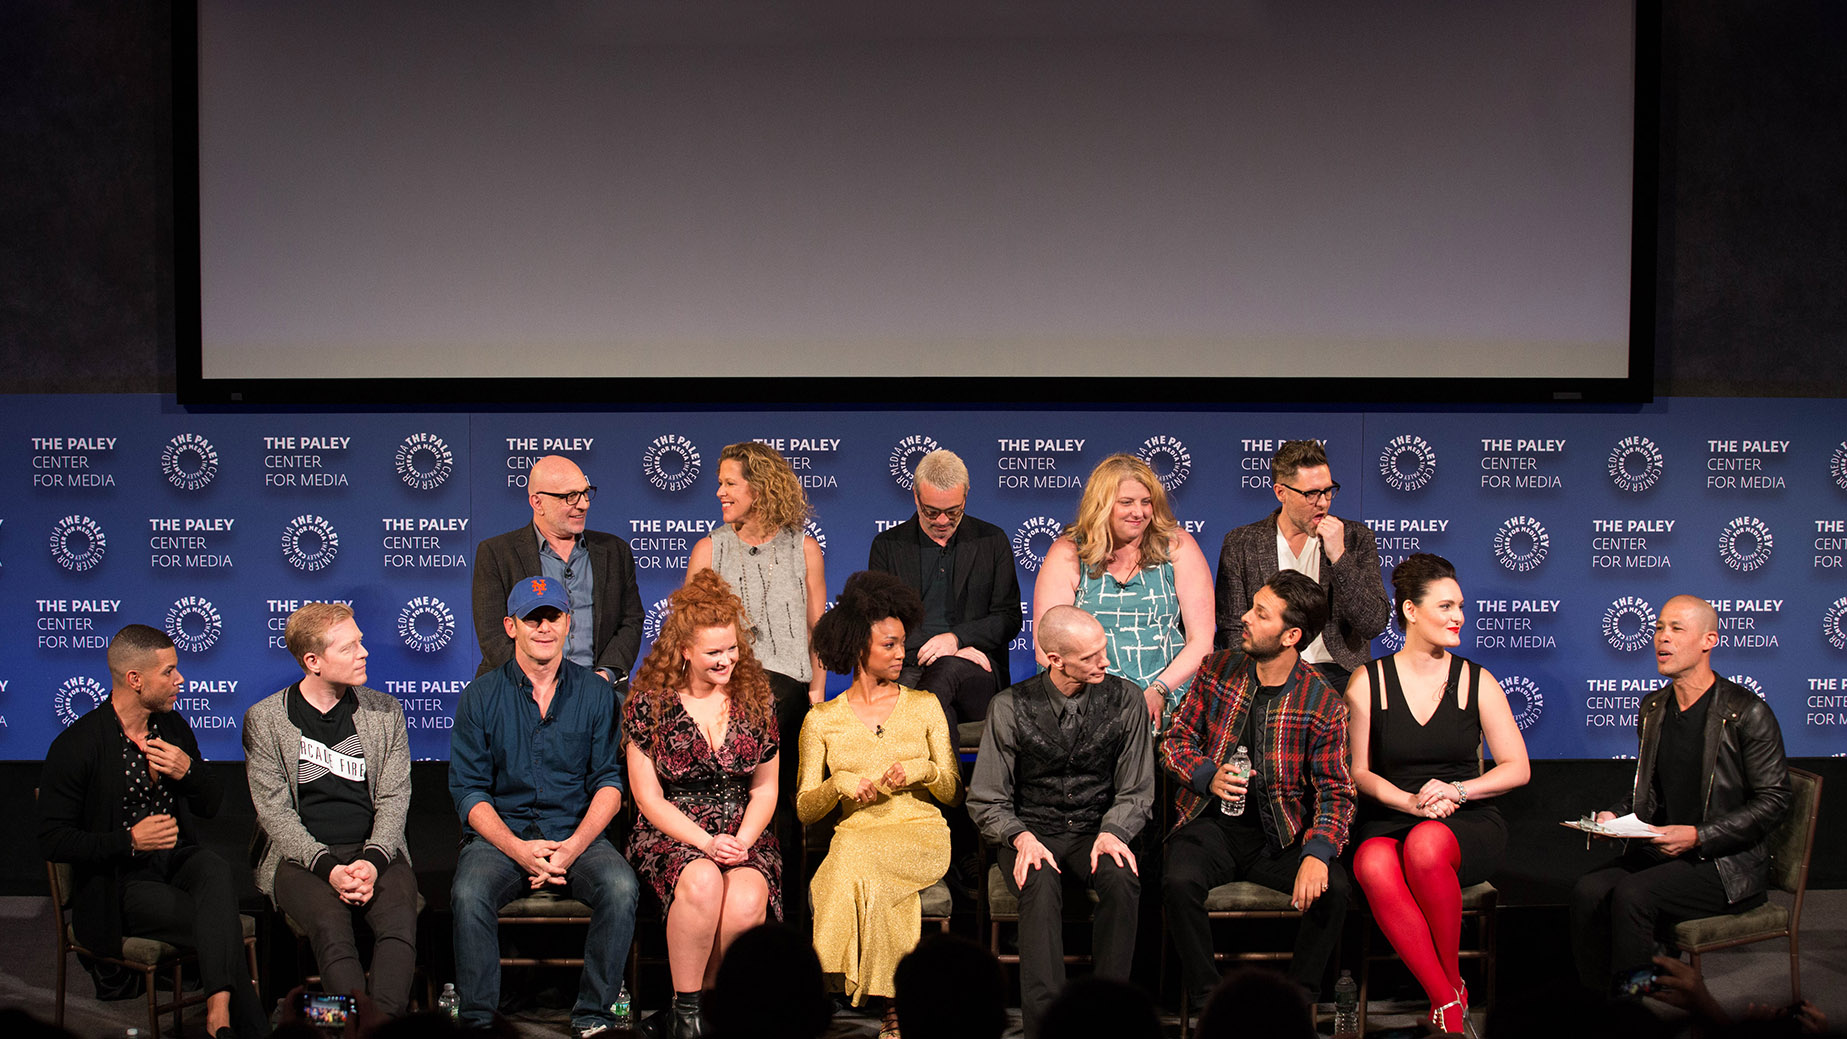 The cast and crew on-stage at PaleyFest